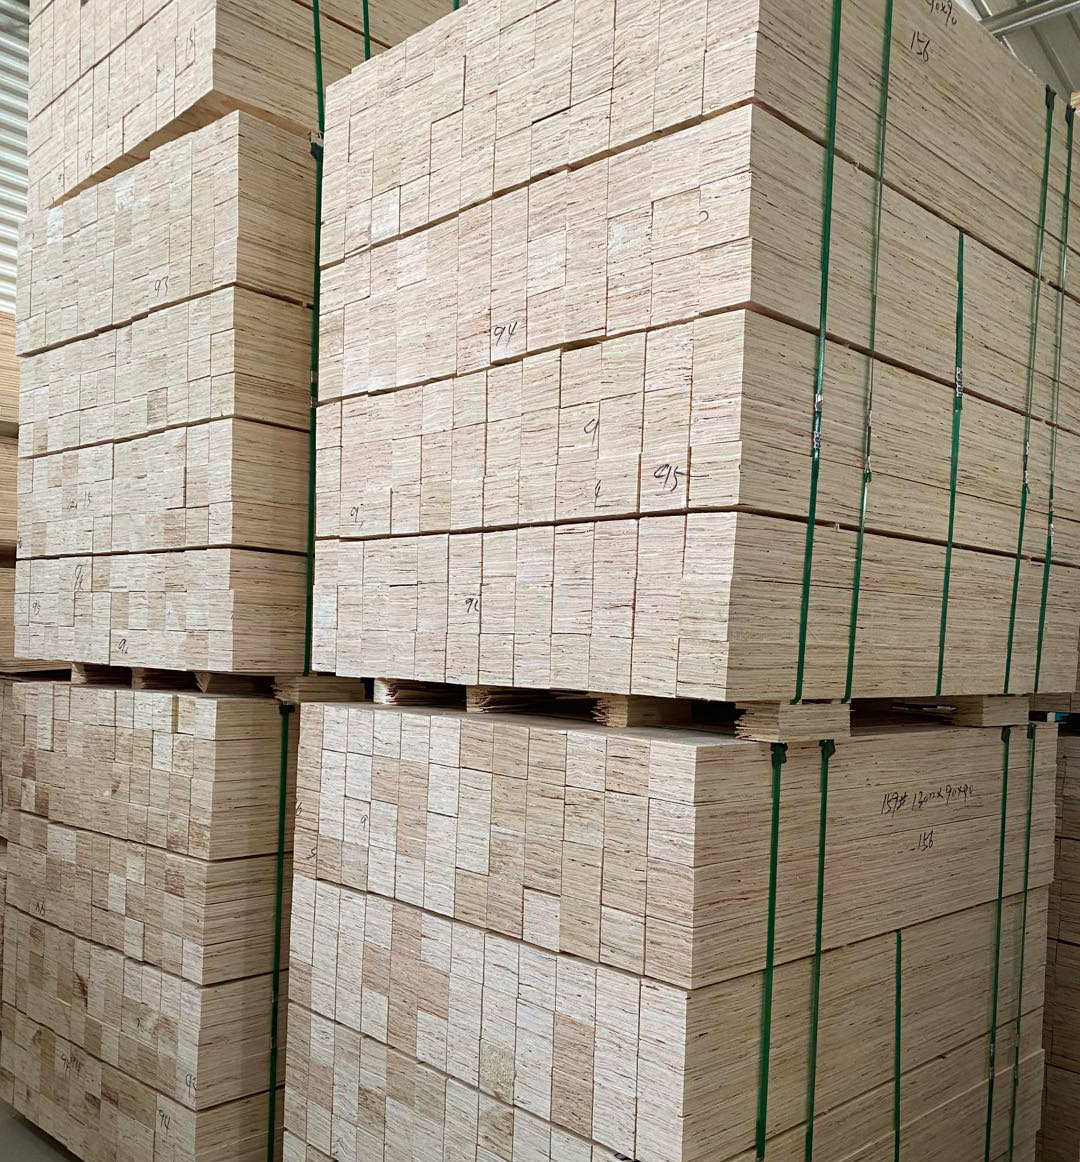 Our mainly products is Packing LVL、LVL Scaffold Board、LVL runner、Chip Block、Plywood BlockCommercial plywood、Fancy Plywood/MDF、Sl